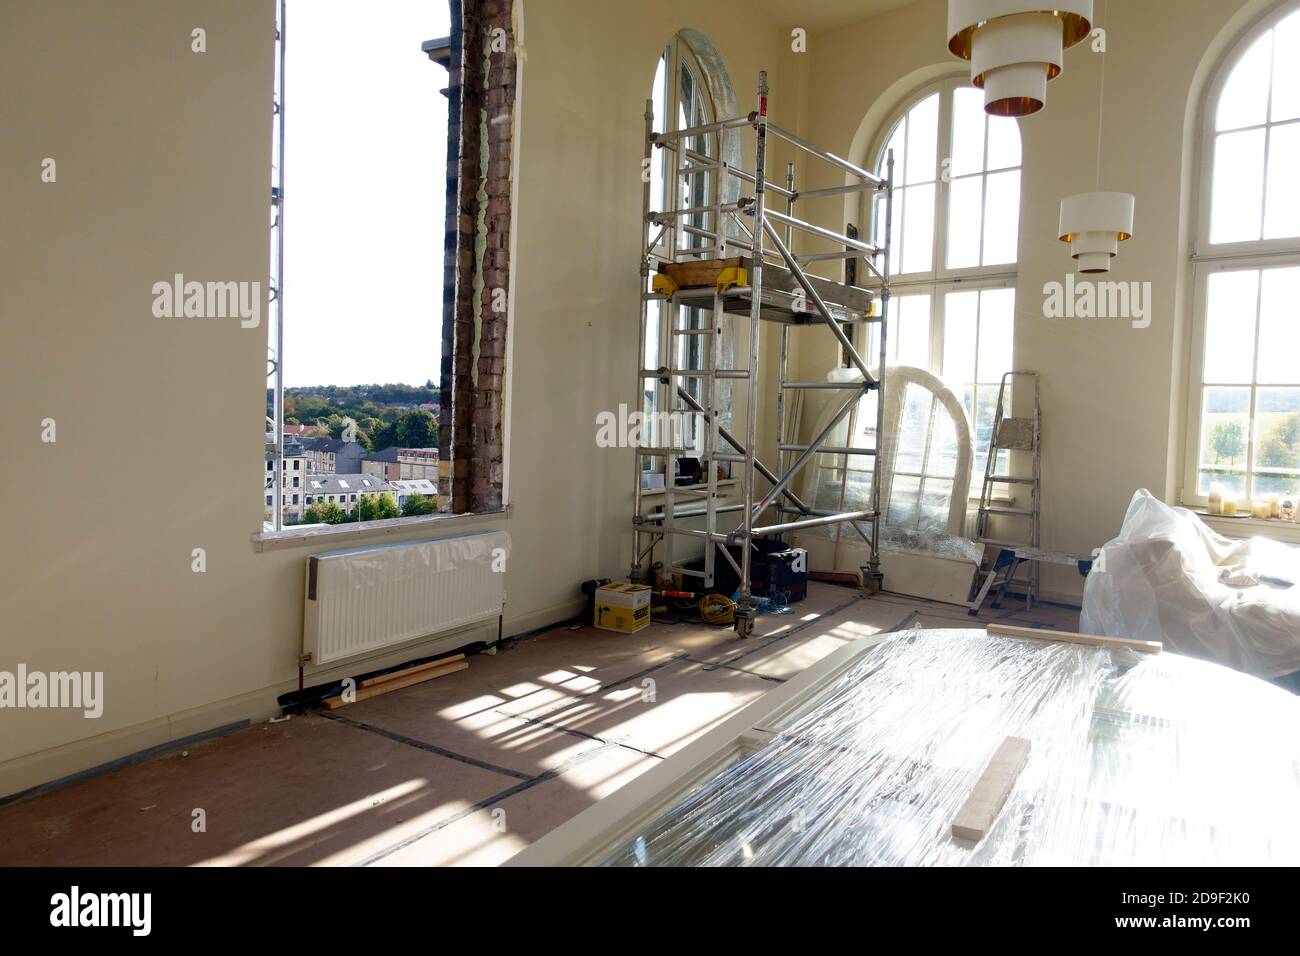 Replacement windows being put in to a 19th century converted mill in Paisley, Scotland Stock Photo